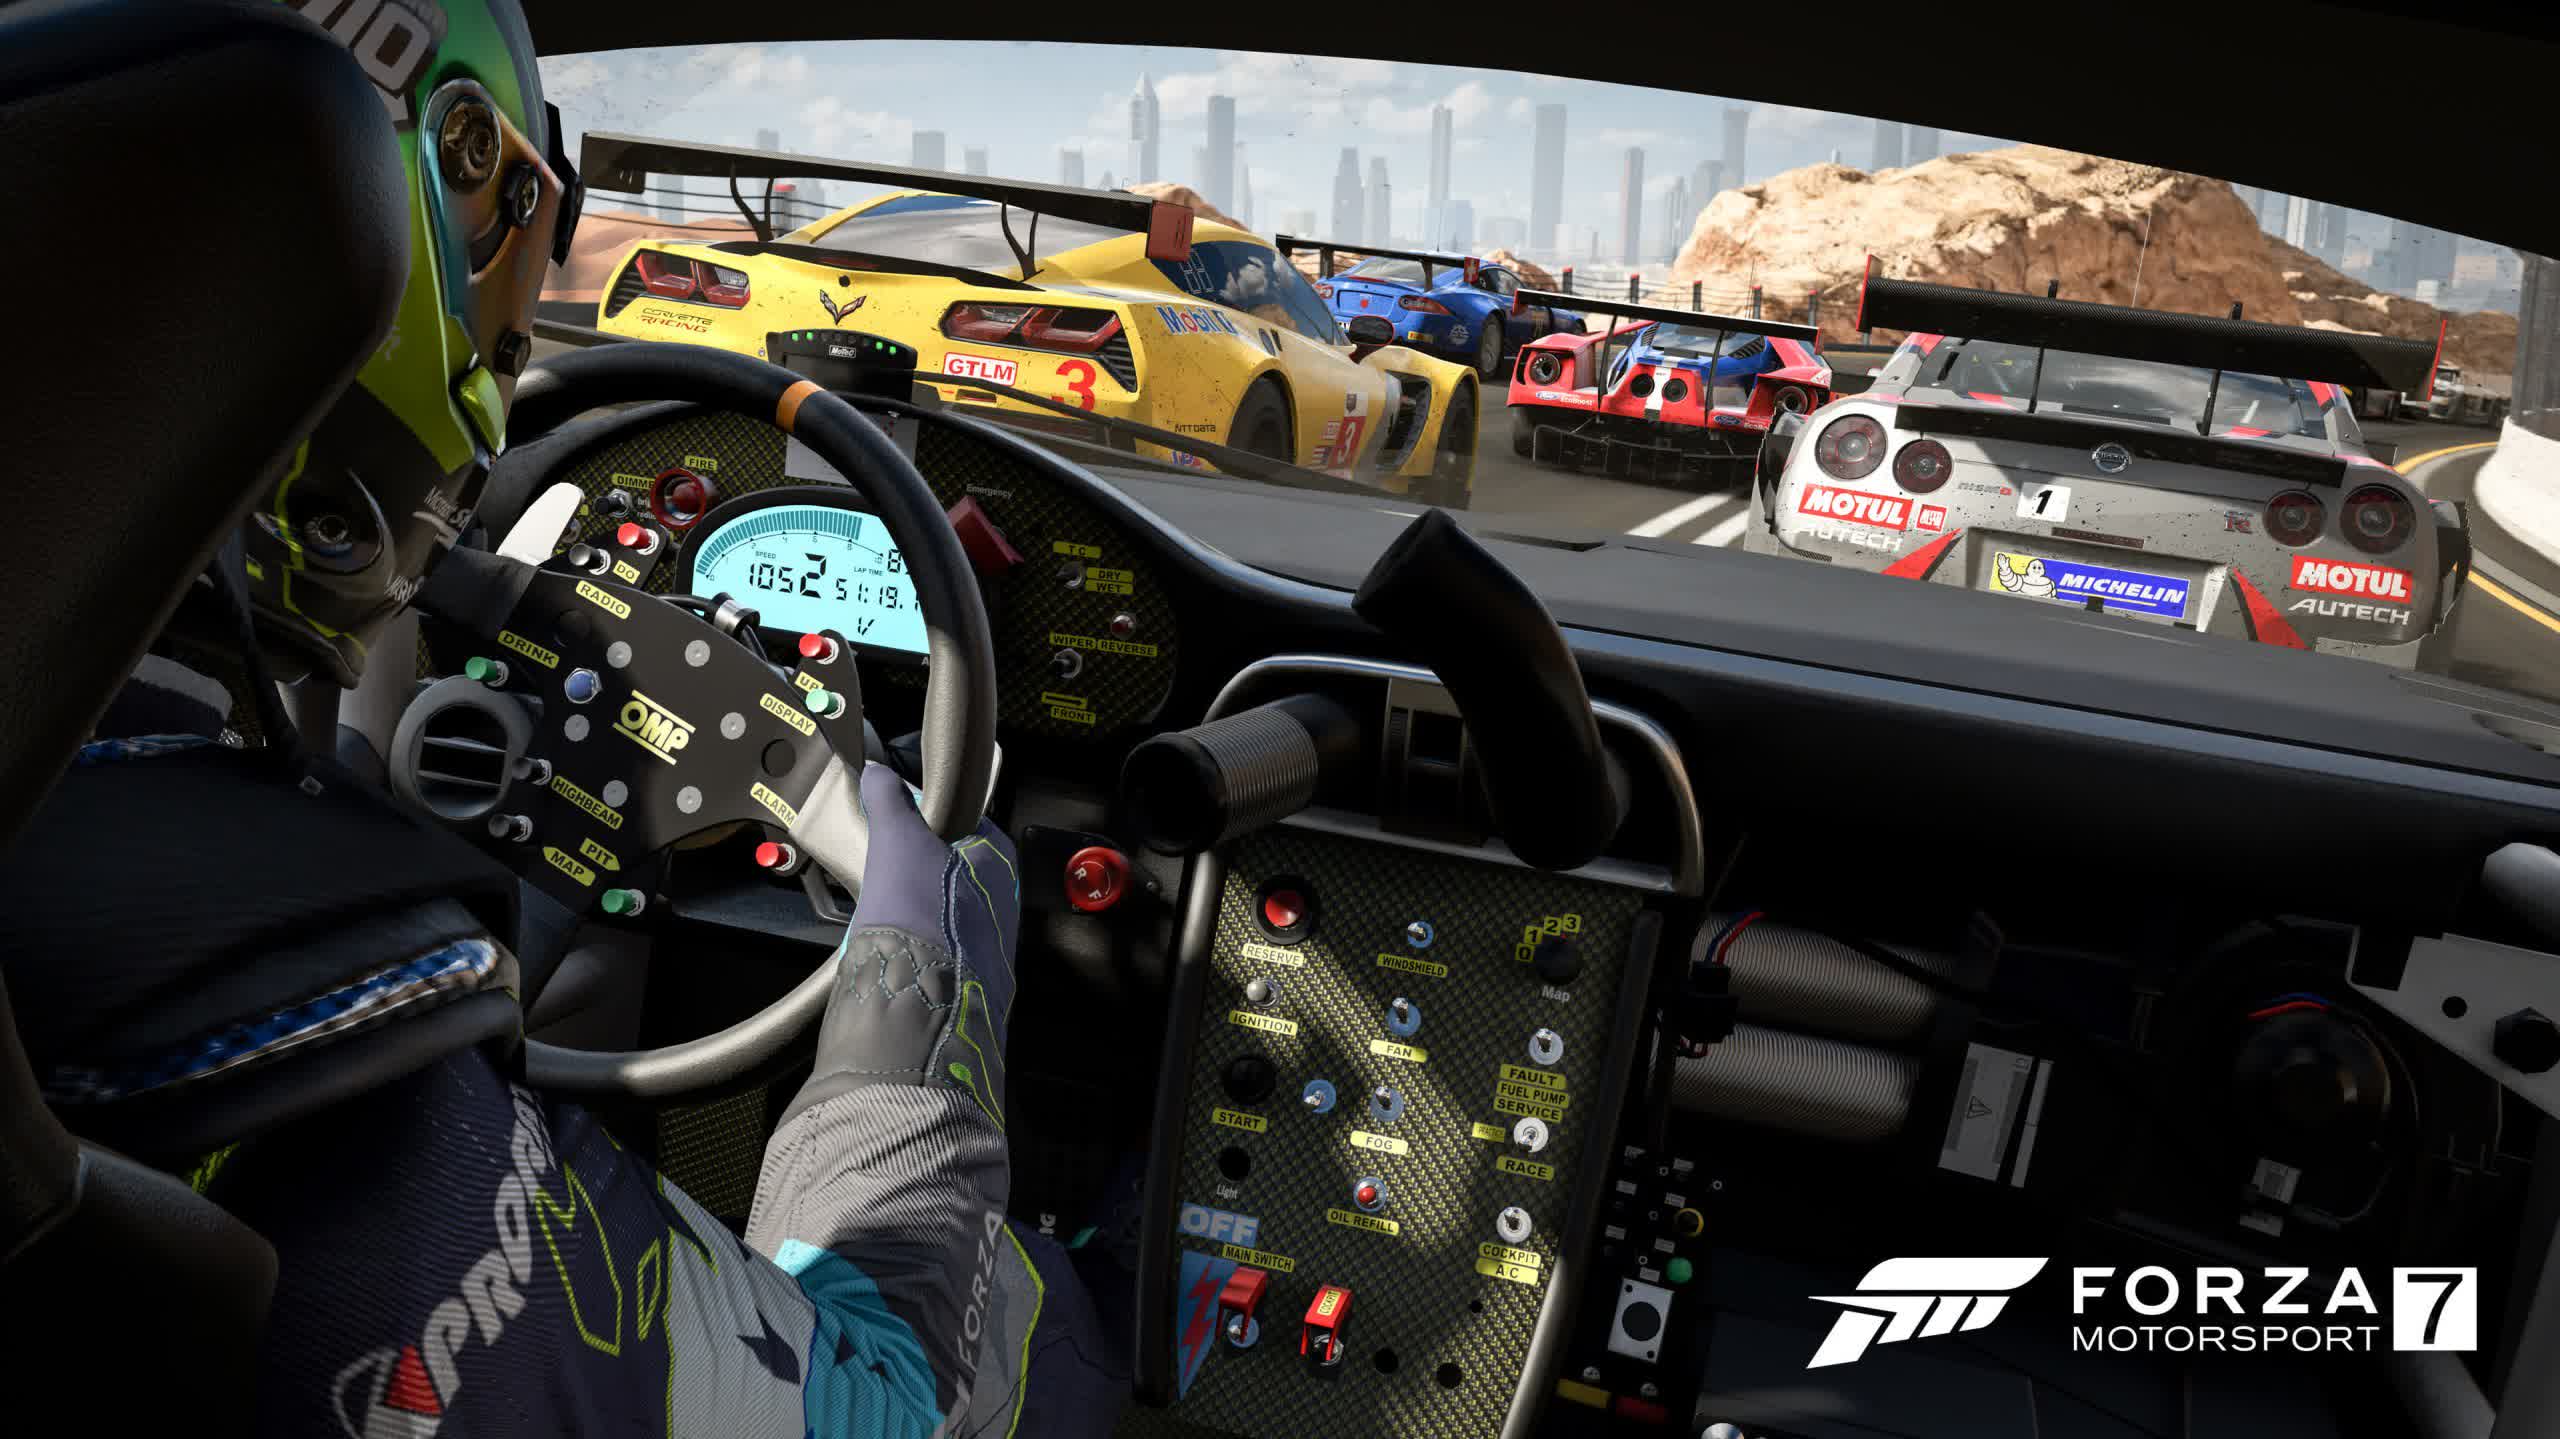 Studio adds audio cues to Forza Motorsport that help blind players race like pros